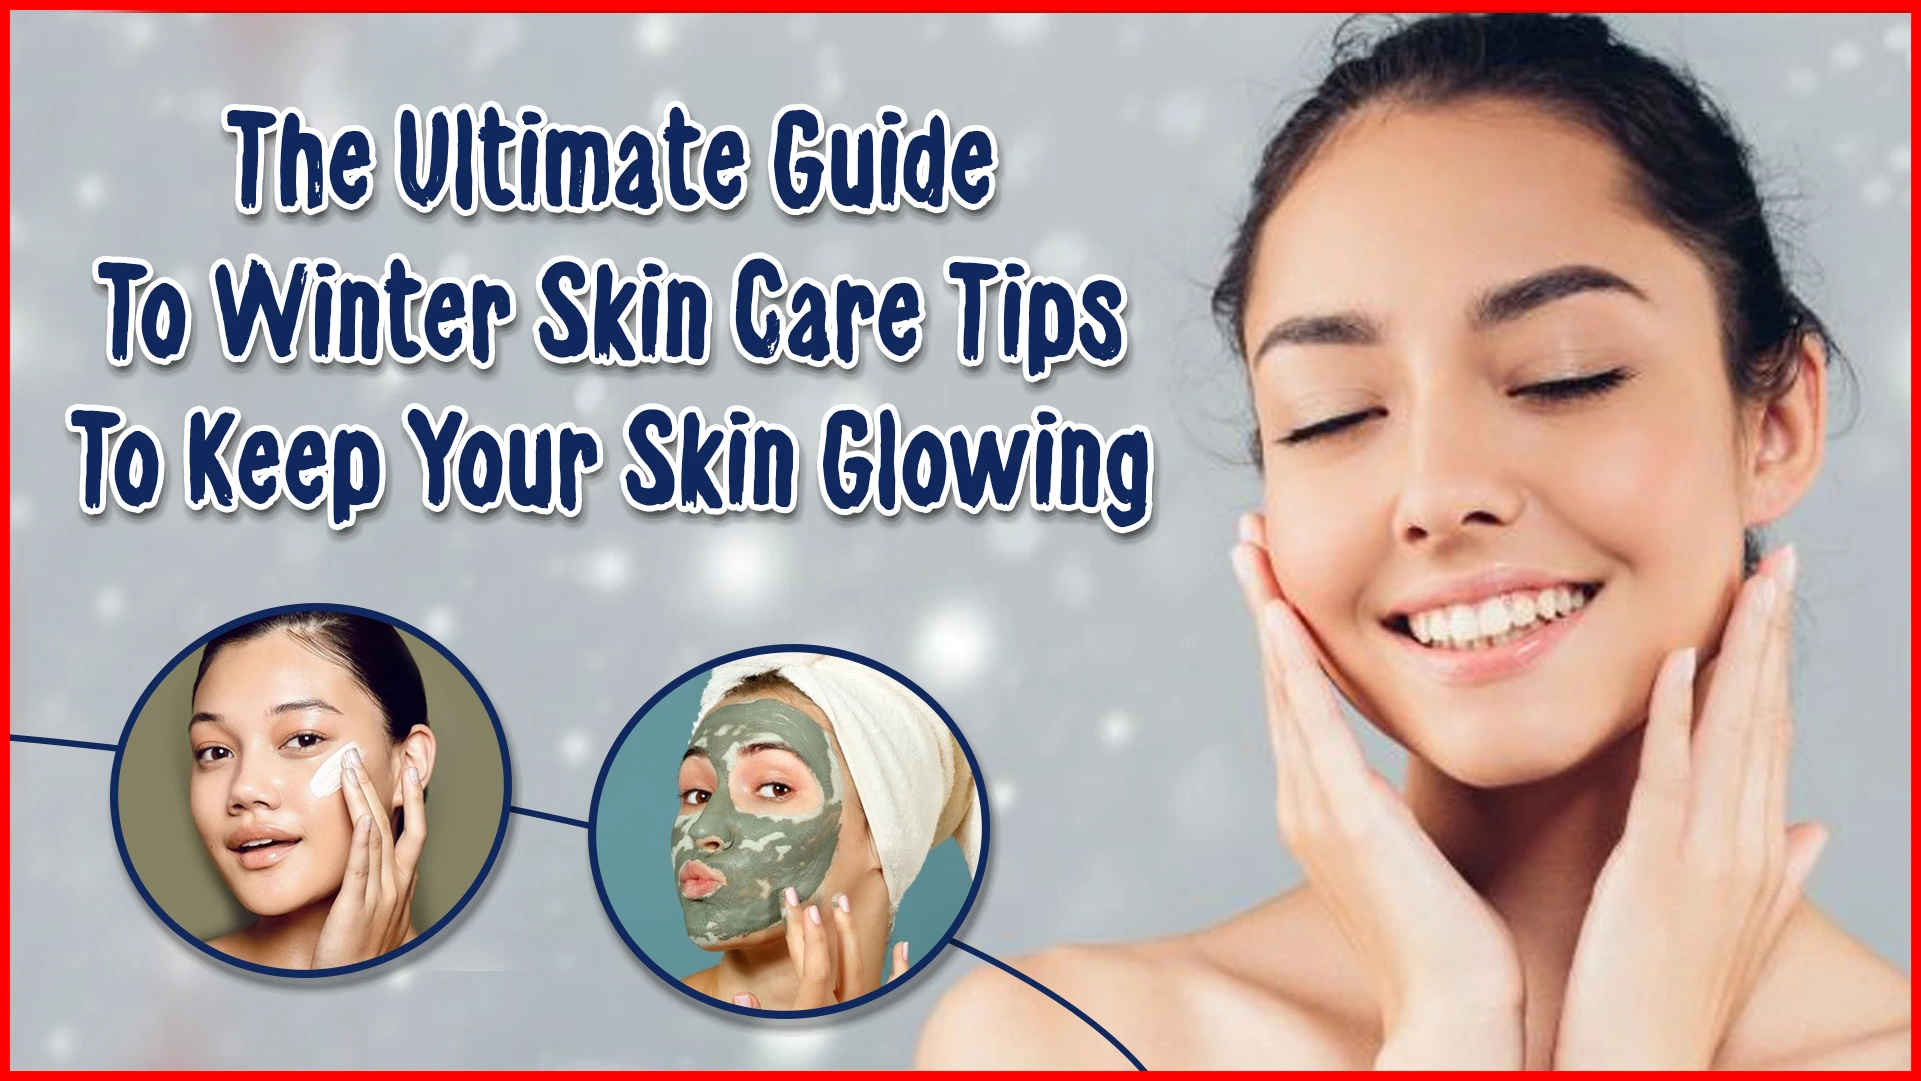 The ultimate guide to winter skin care tips to keep your skin glowings